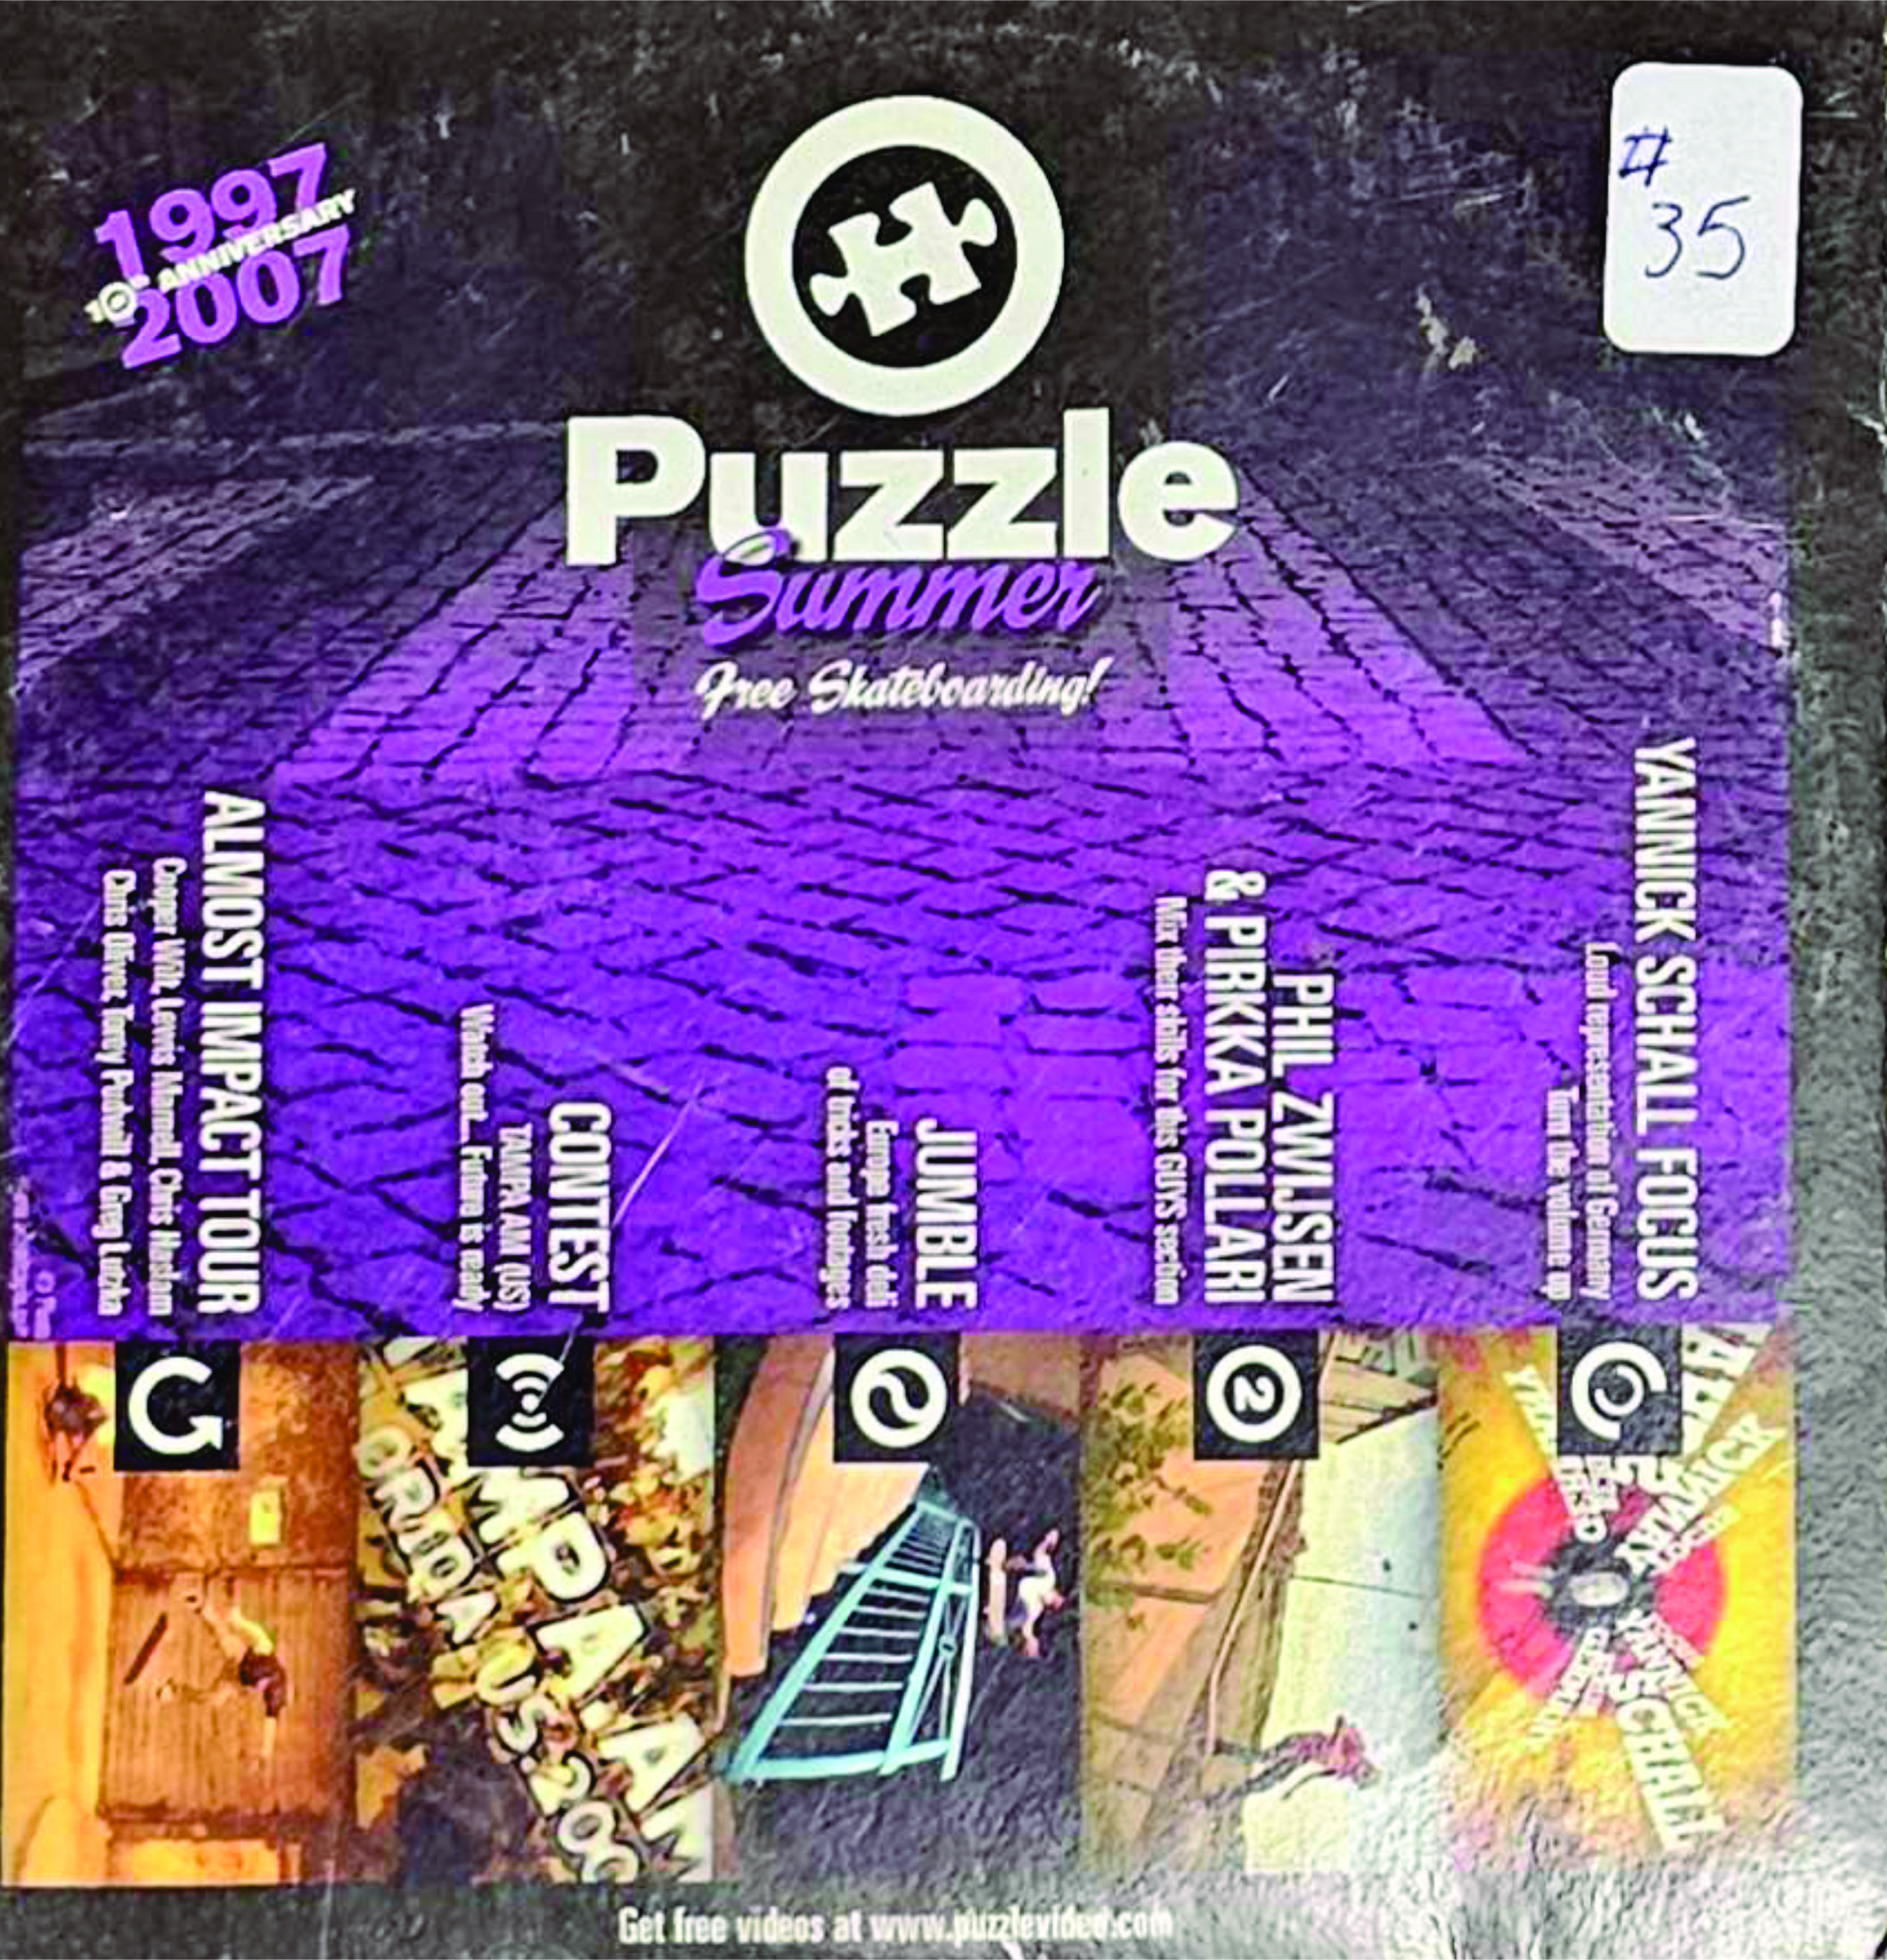 Puzzle Video - Summer 2007 cover